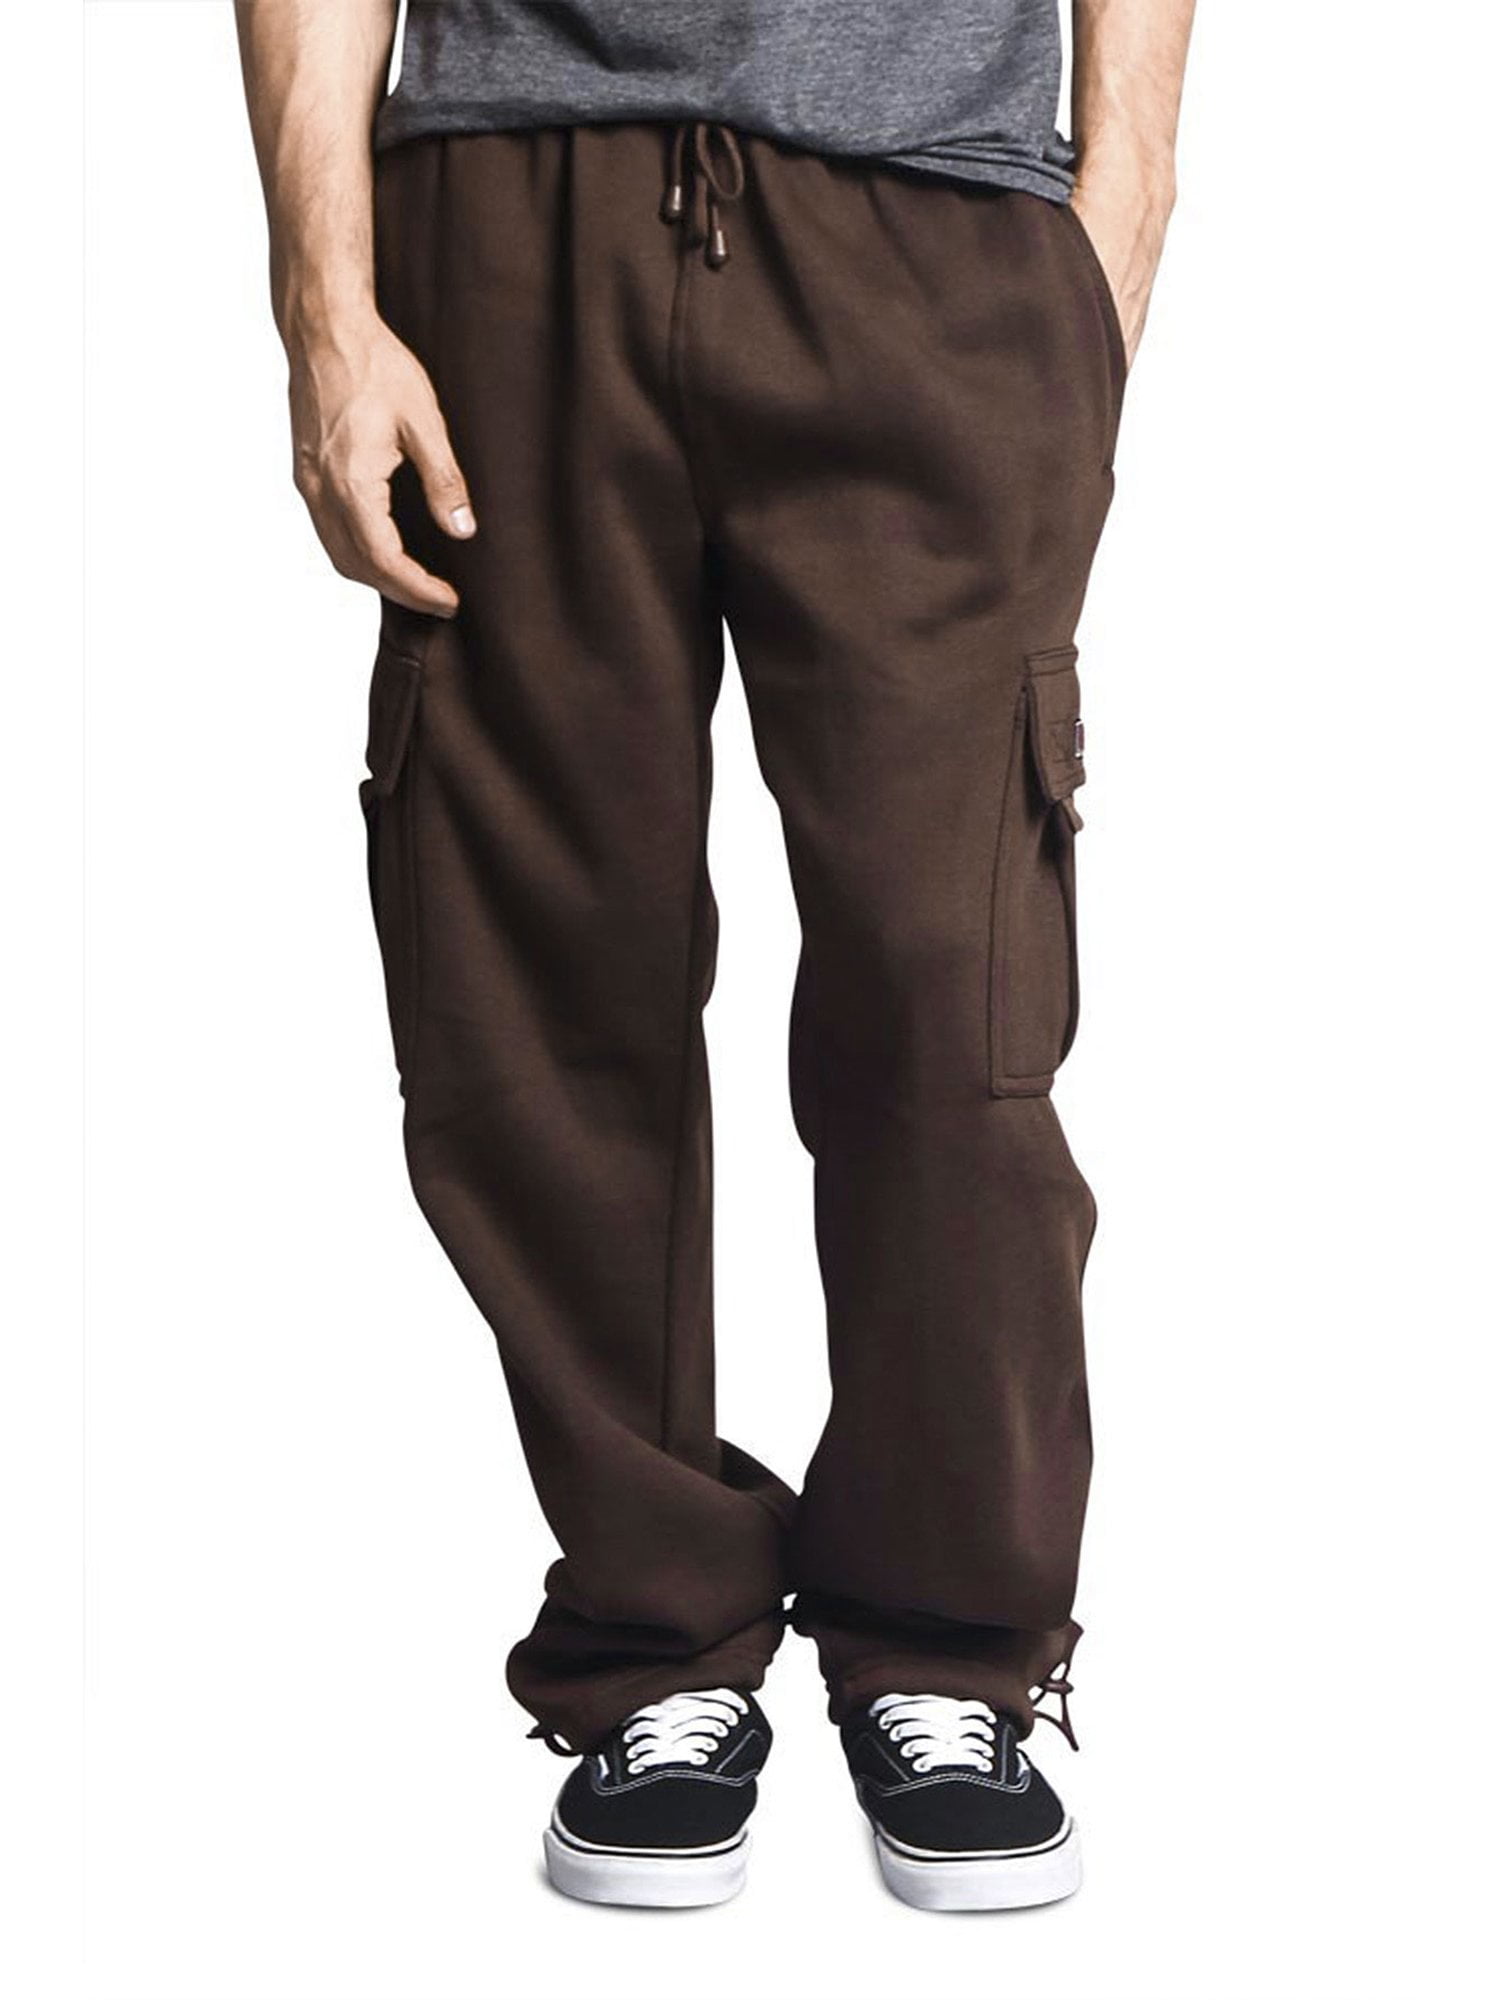 Victorious Men's Heavyweight Fleece Relaxed Lounge Cargo Sweatpants - Brown  - 3X-Large